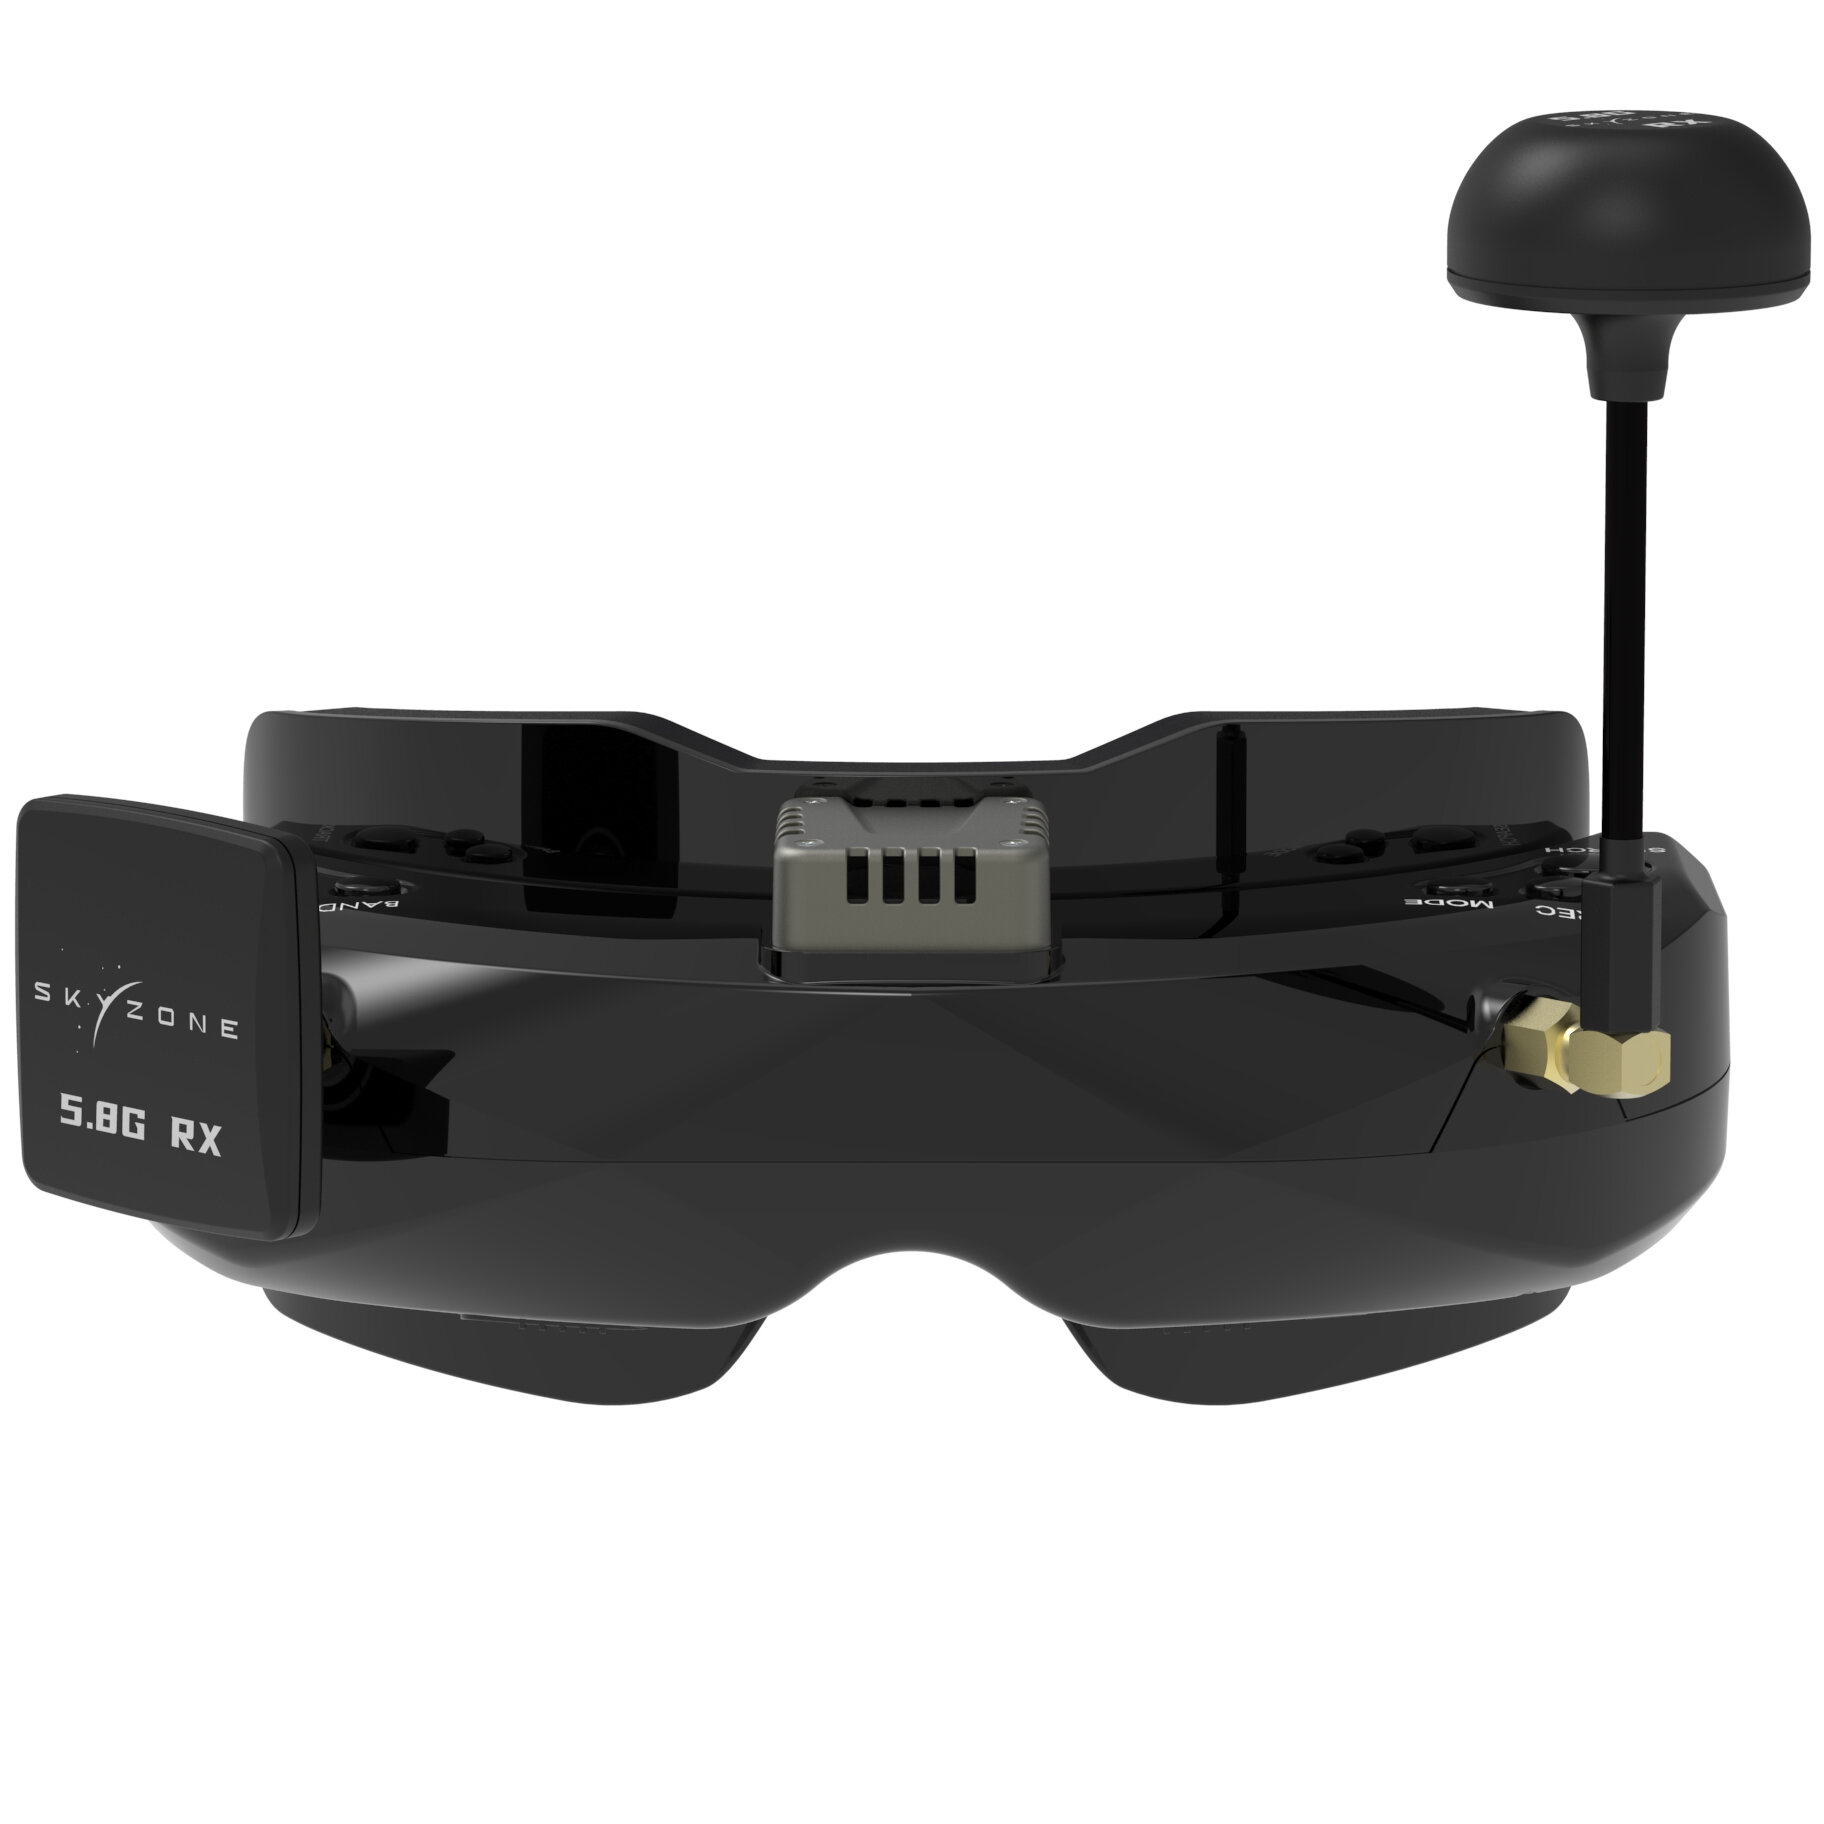 SKYZONE SKY02O FPV Goggles OLED 5.8Ghz SteadyView Diversity RX Built in HeadTracker DVR HDMI AVIN／OUT for RC Racing Drone － Black